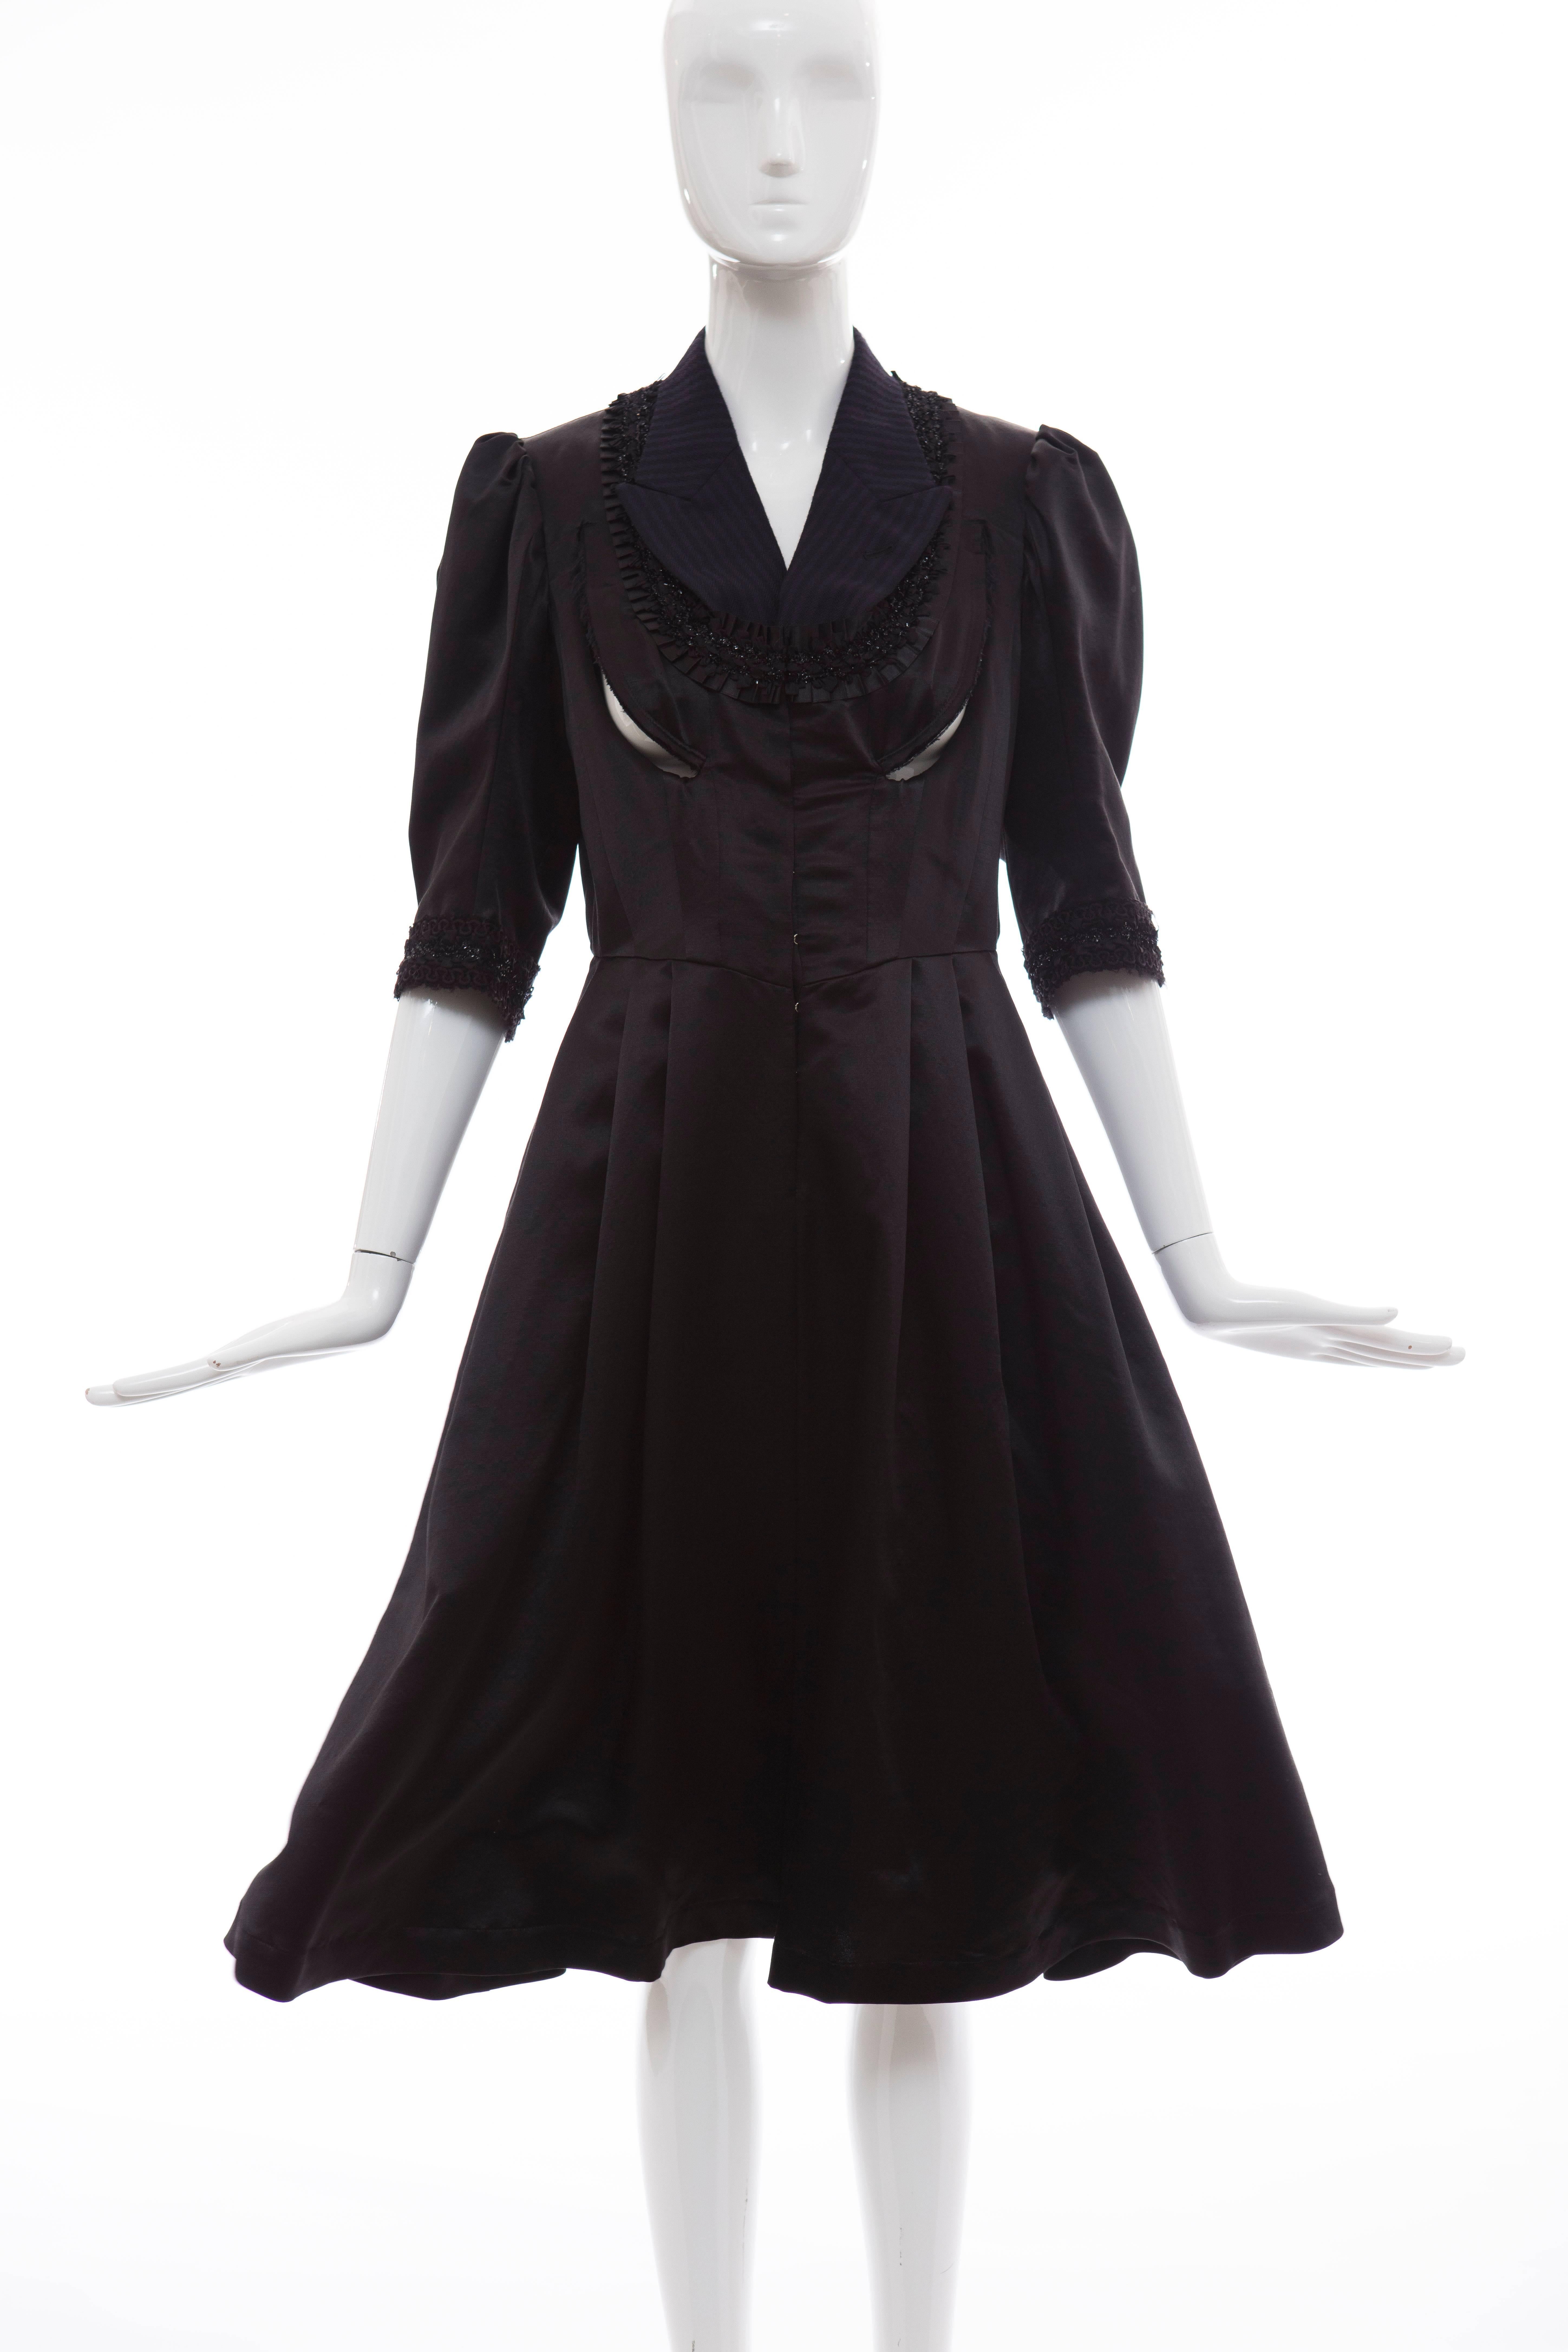 Comme des Garçons, Fall 2006 navy black midi wool silk satin dress with peak lapels, three-quarter length sleeves, embroidered and ruffle trim at neckline and sleeve cuffs, dual pockets at sides and hook closures at front.

Japan: Small

Bust 34